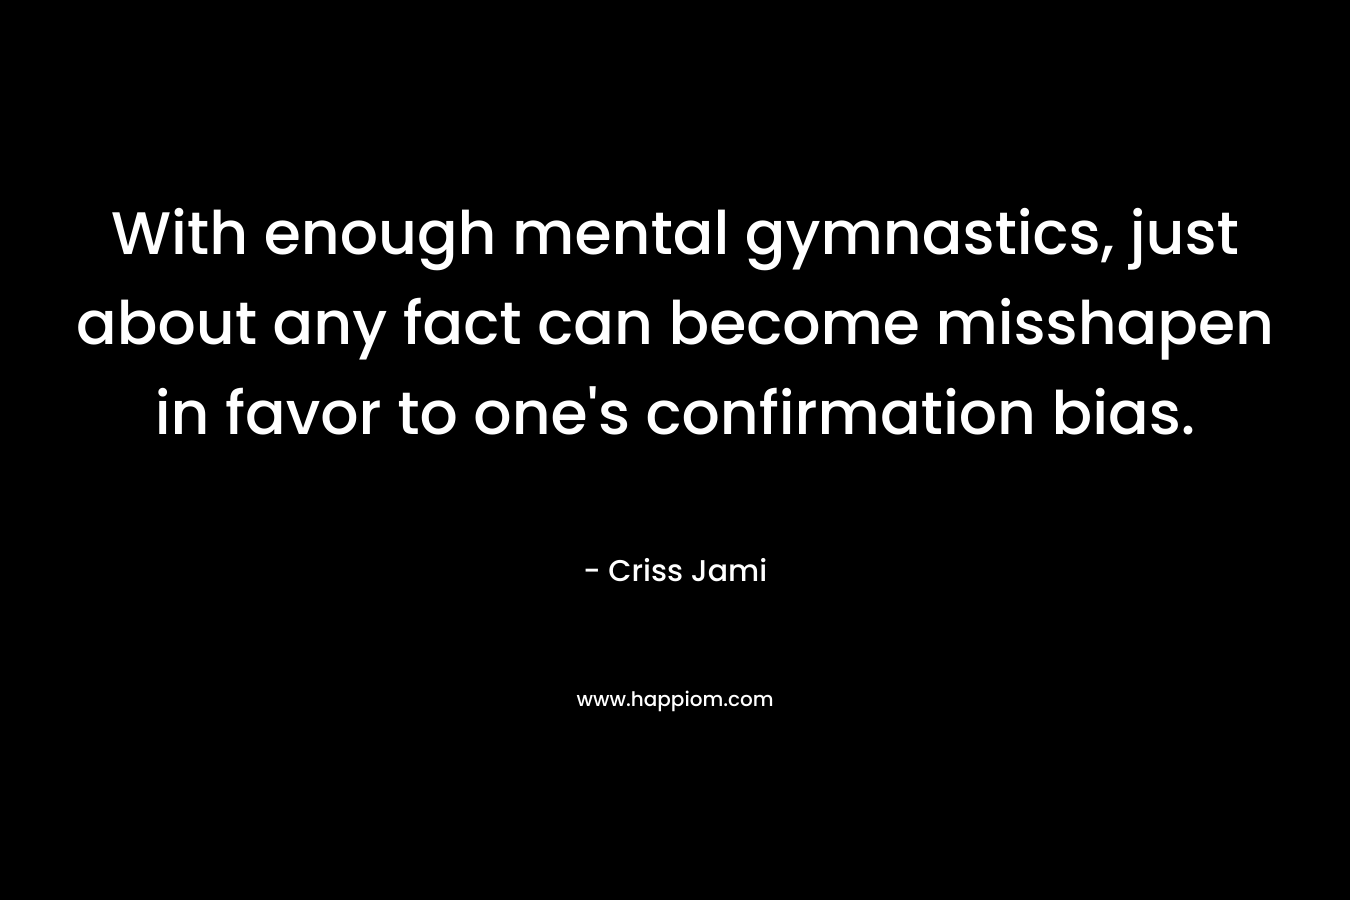 With enough mental gymnastics, just about any fact can become misshapen in favor to one’s confirmation bias. – Criss Jami